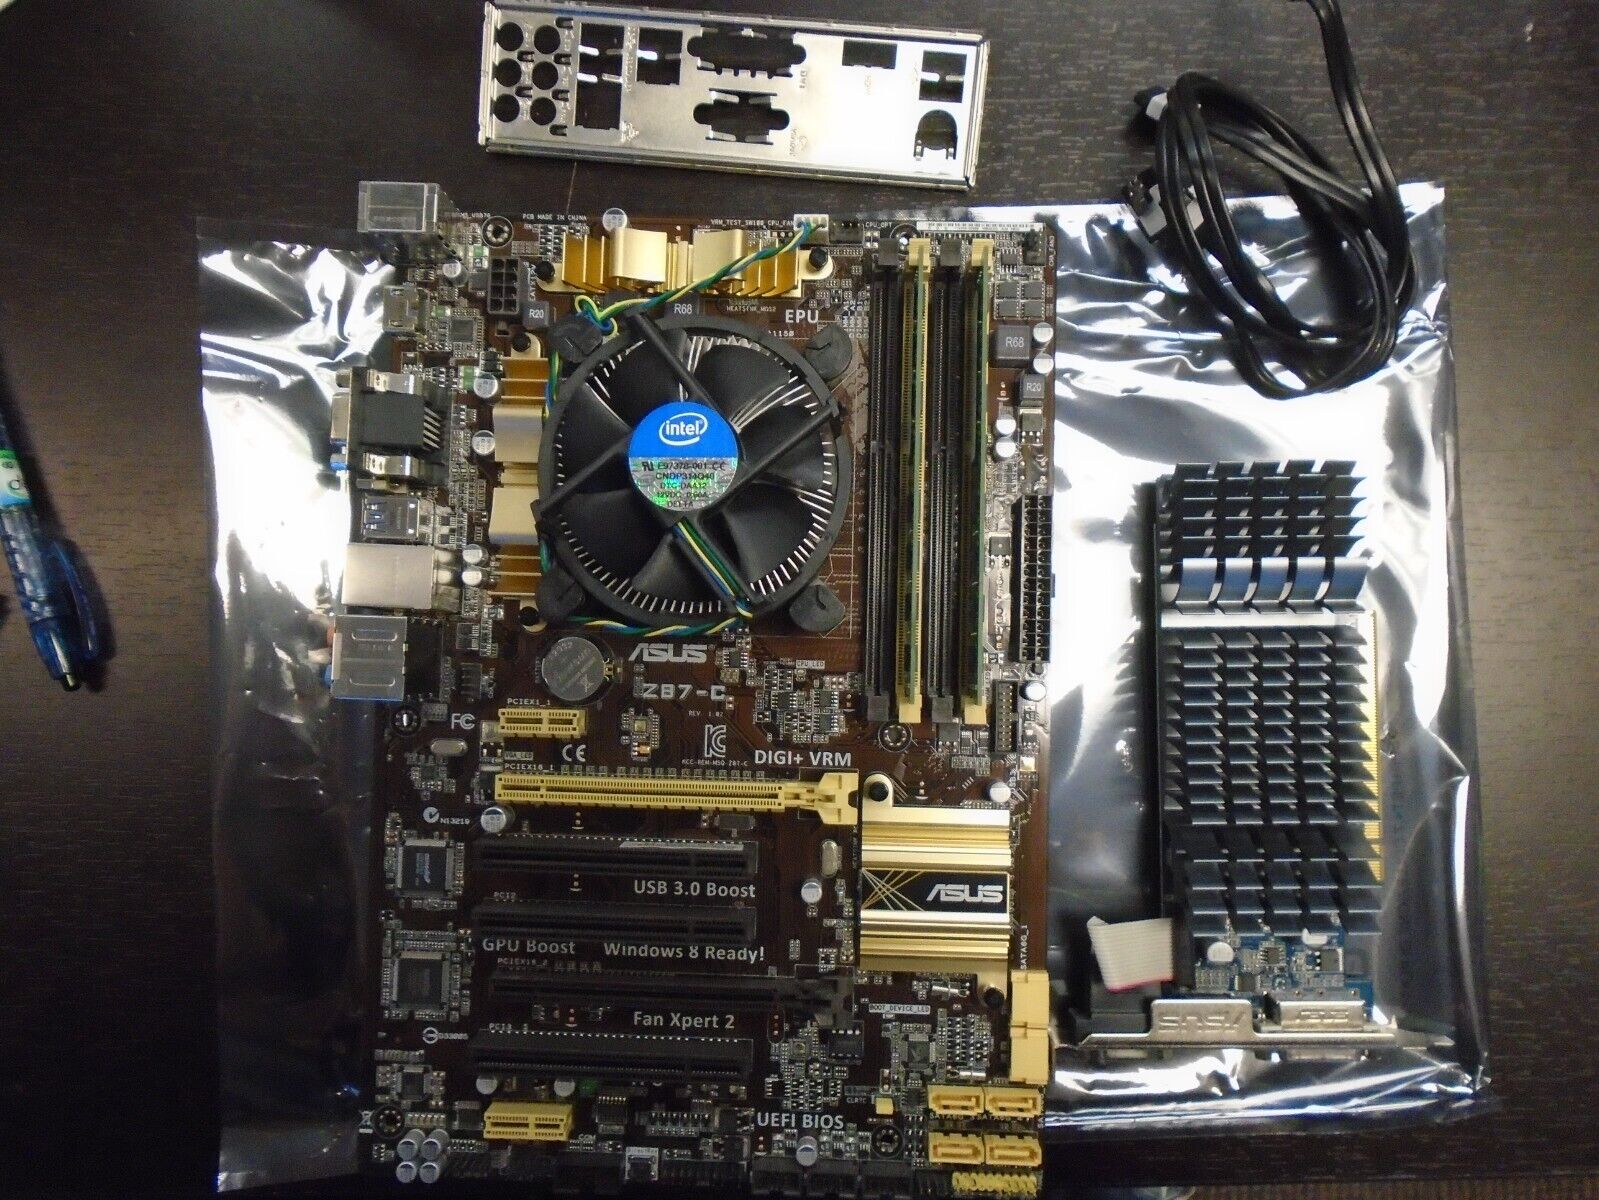 ASUS Z87-C Motherboard tested and working, with Sata Cables, Video card, Shield